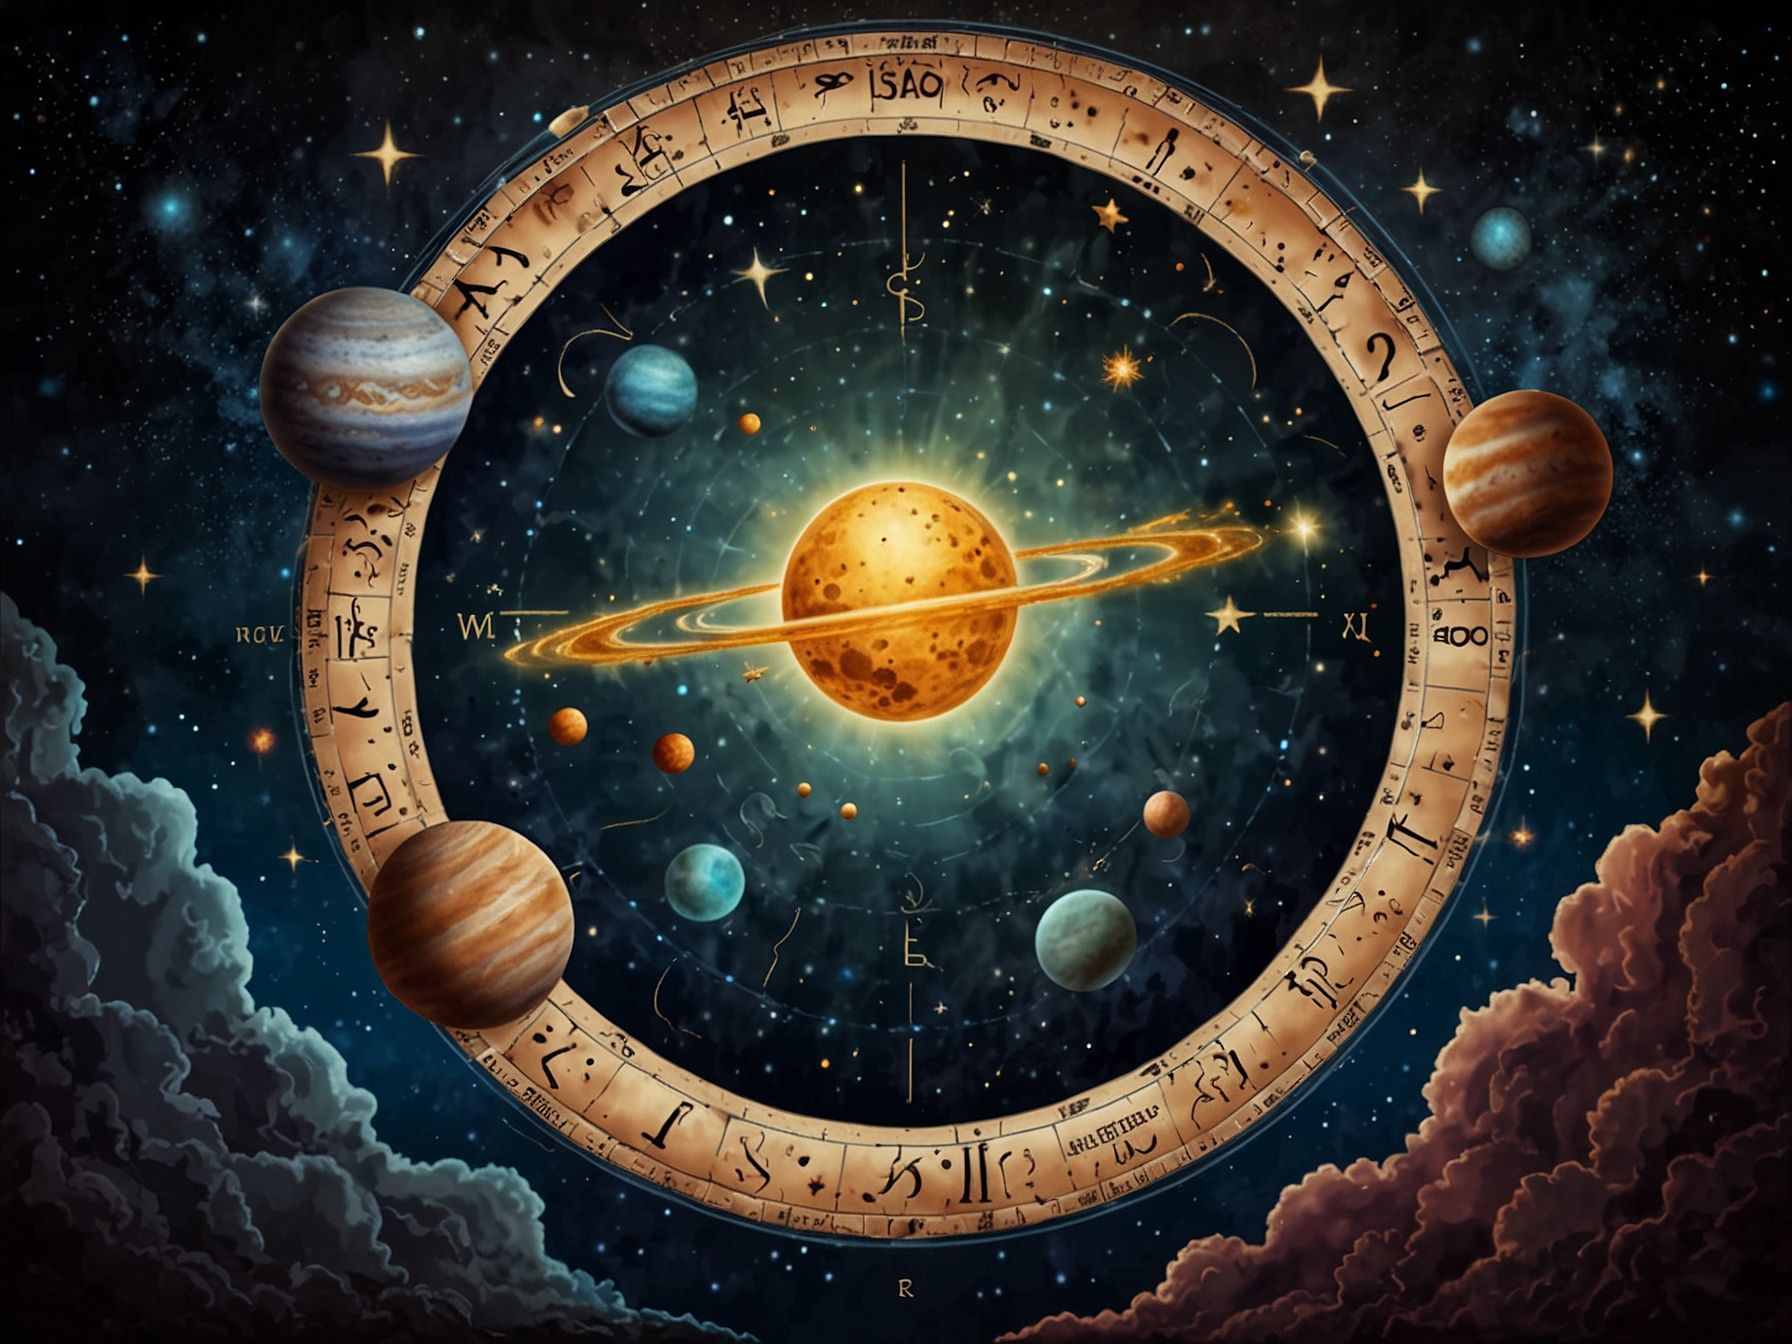 A depiction of a celestial scene with planets aligning, illustrating the cosmic energies shaping the week's horoscope for all zodiac signs, from Aries to Pisces.